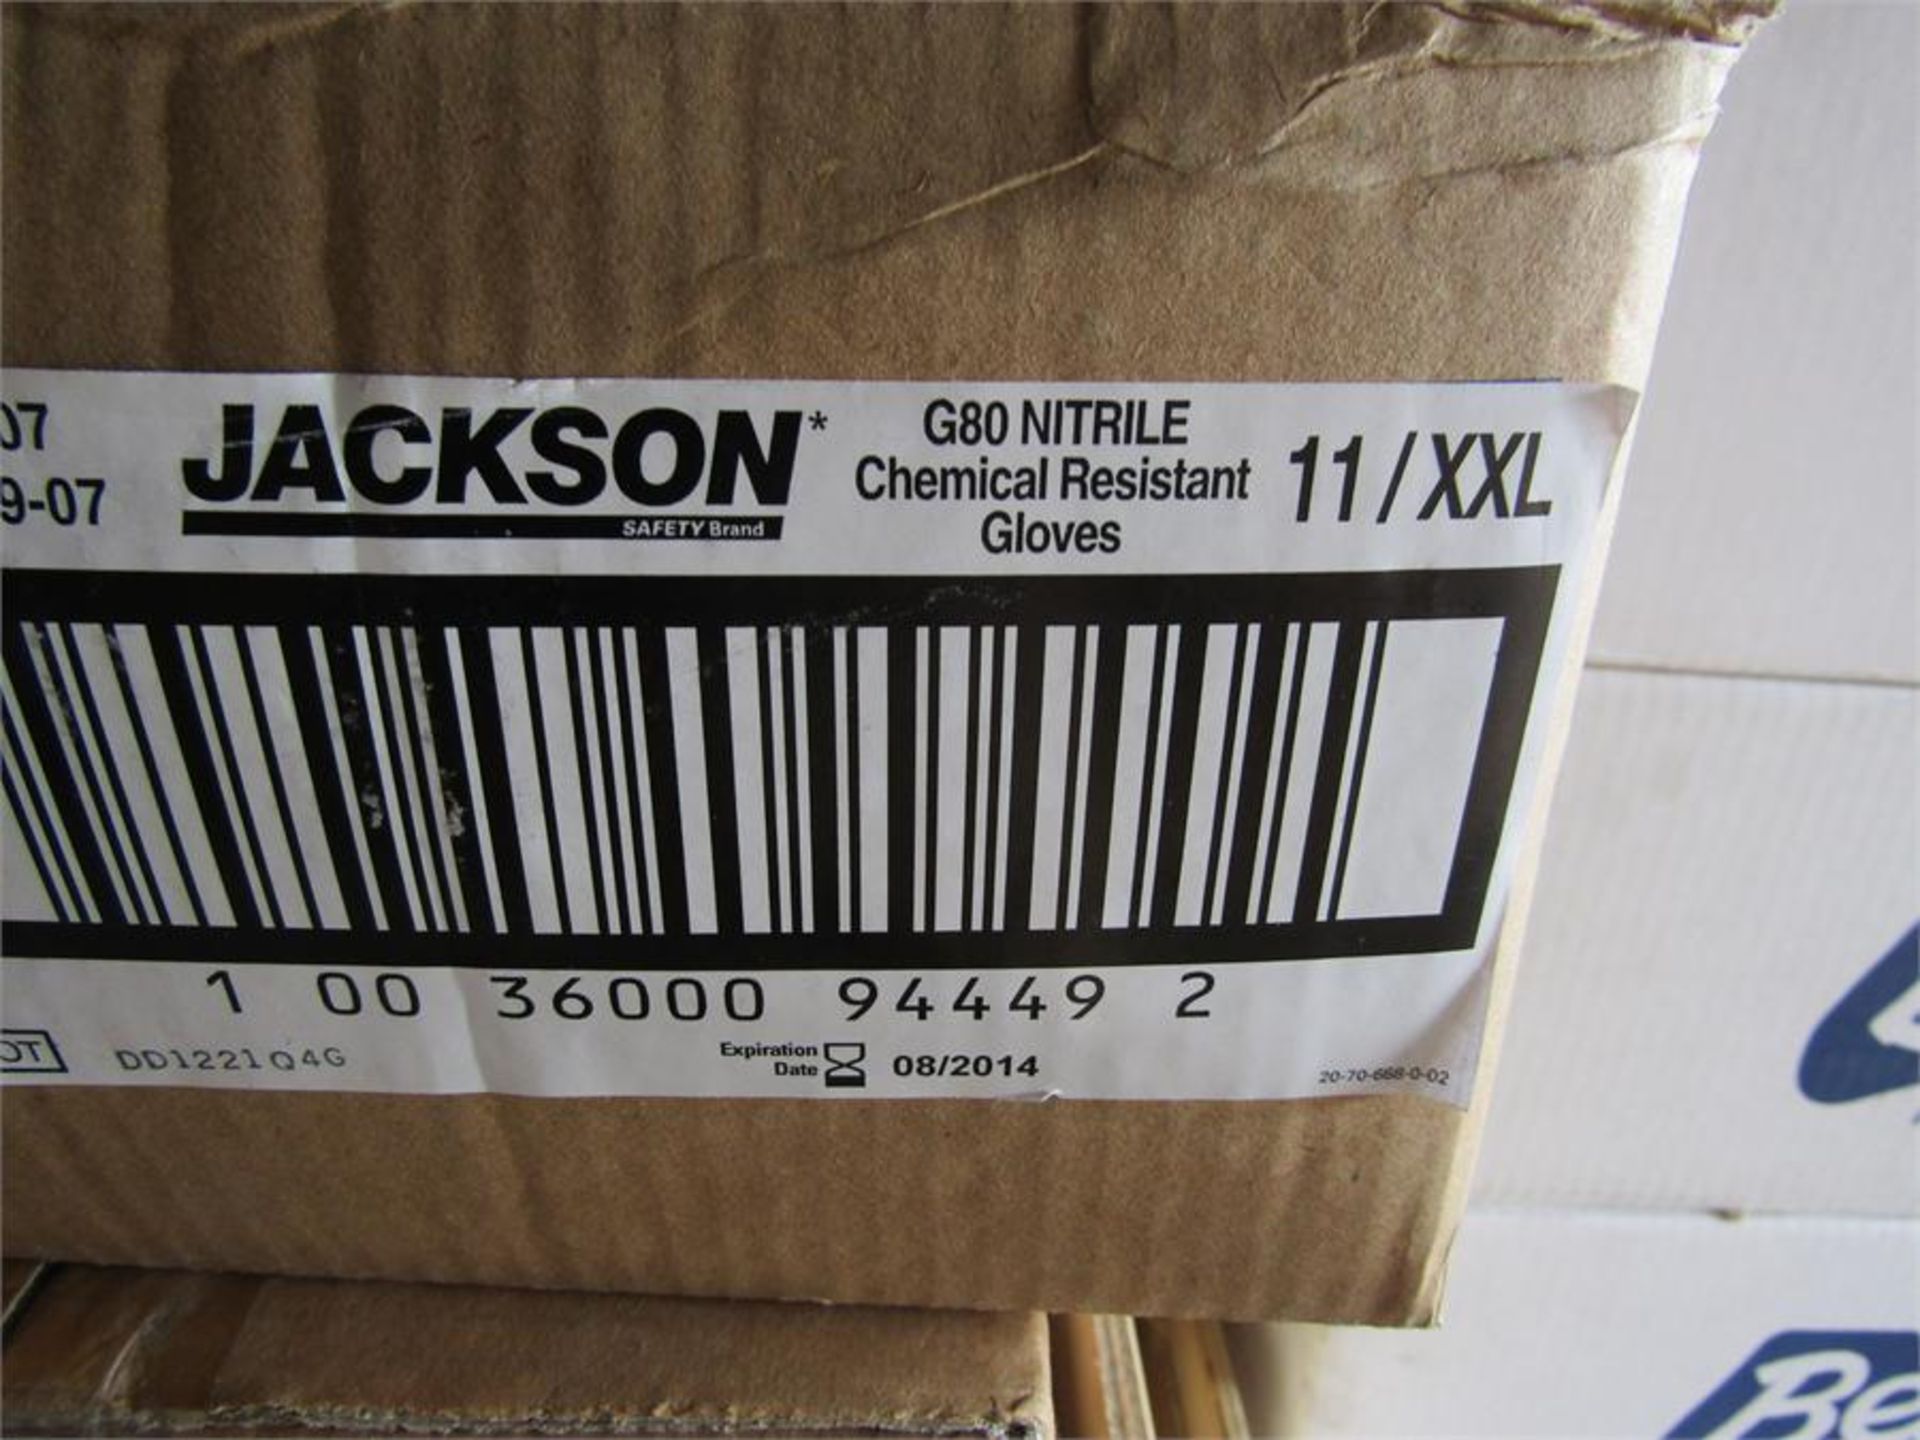 60 Pairs of JACKSON G80 NITRILE Chem Res Gloves - Image 3 of 3